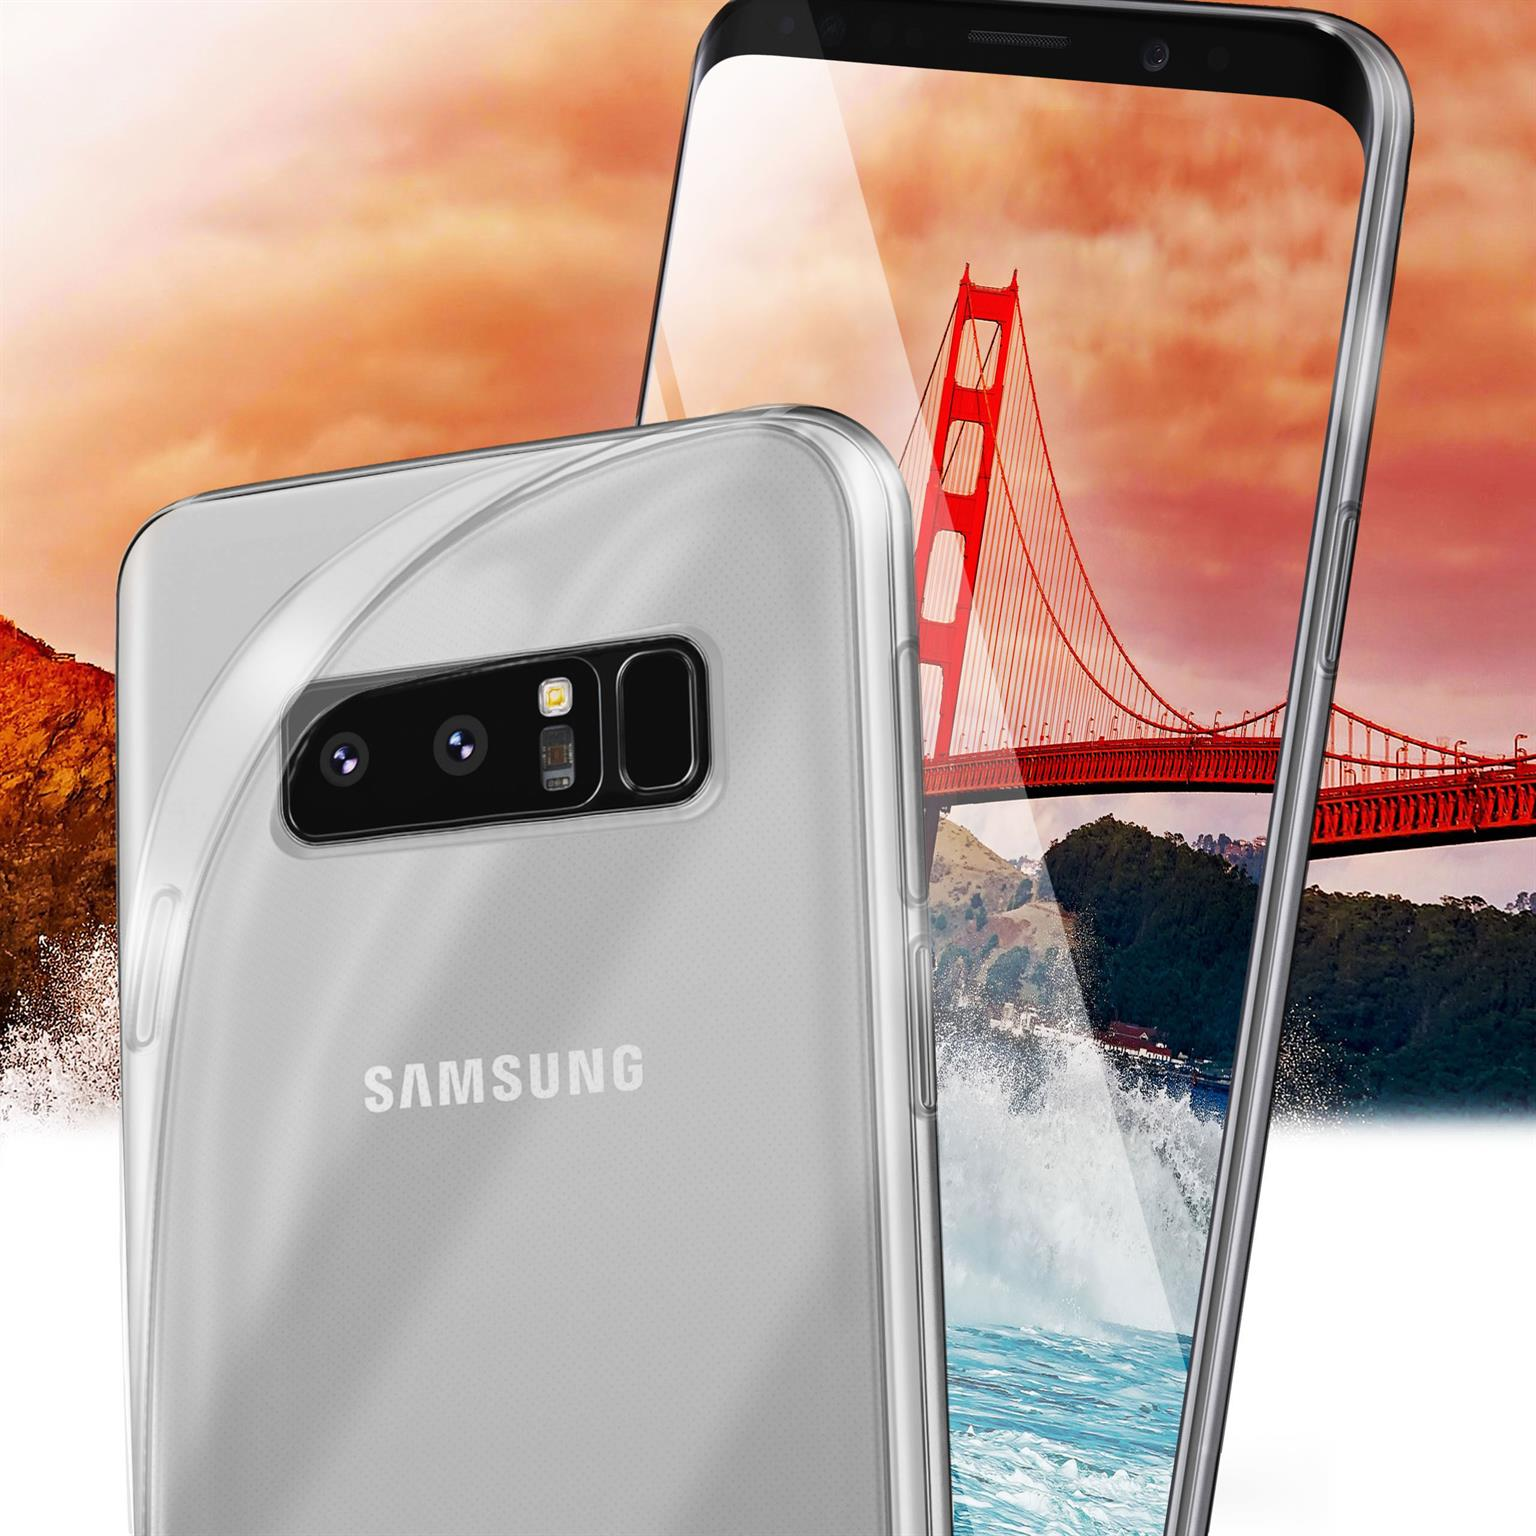 Backcover, Crystal-Clear Samsung, MOEX Galaxy Aero 8, Note Case,